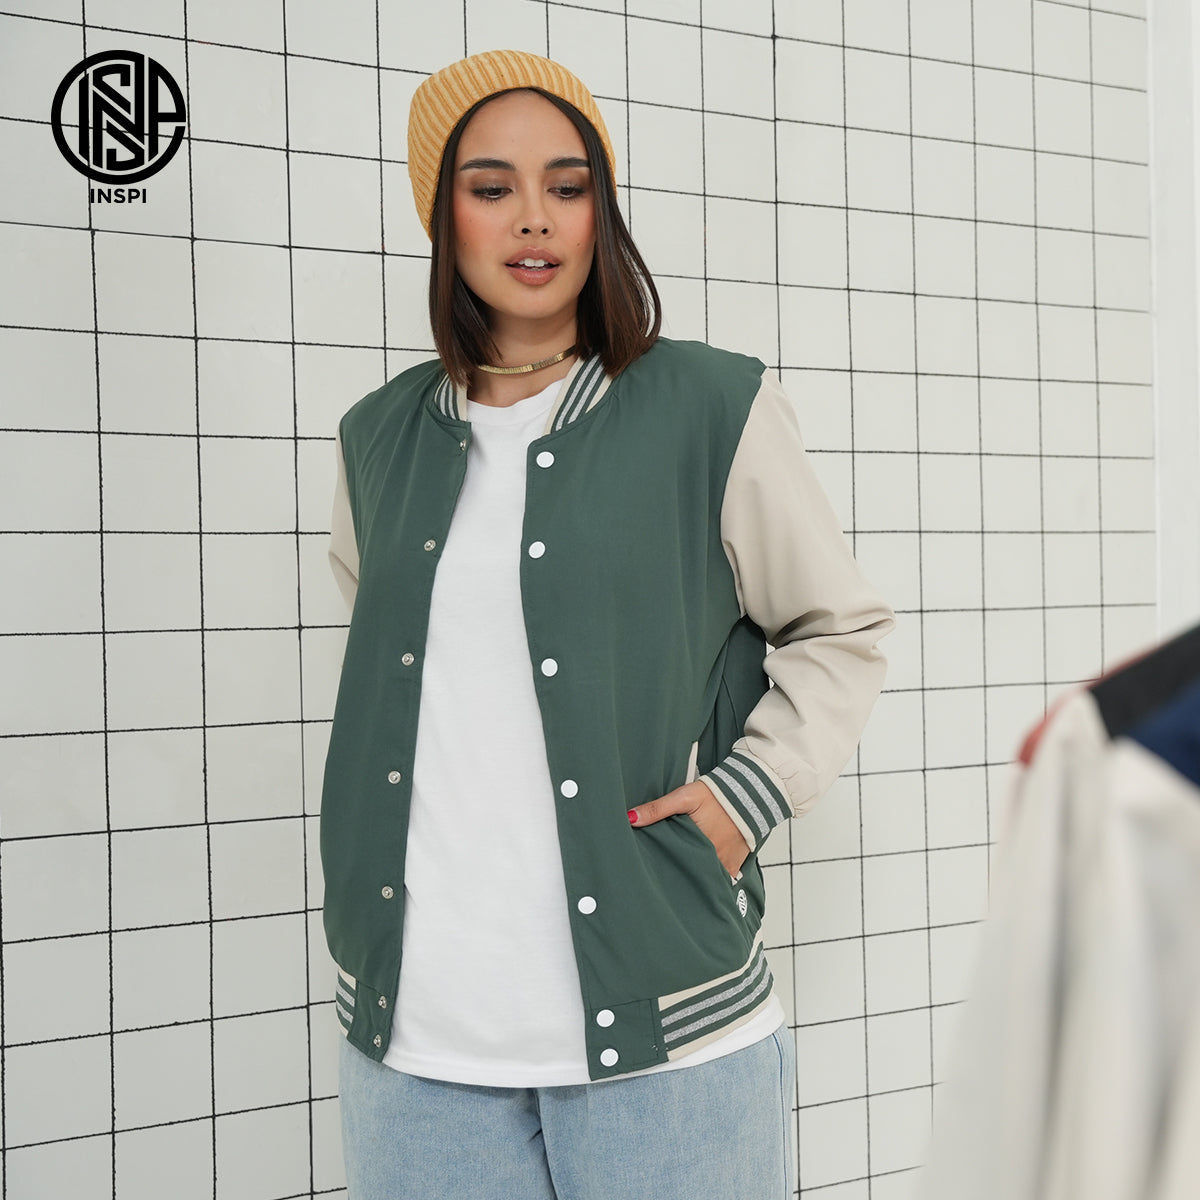 INSPI x Bonez & Fofo Varsity Jacket for Men Baseball Jersey Line with Buttons and Pockets Collection Trendy Jackets for Women